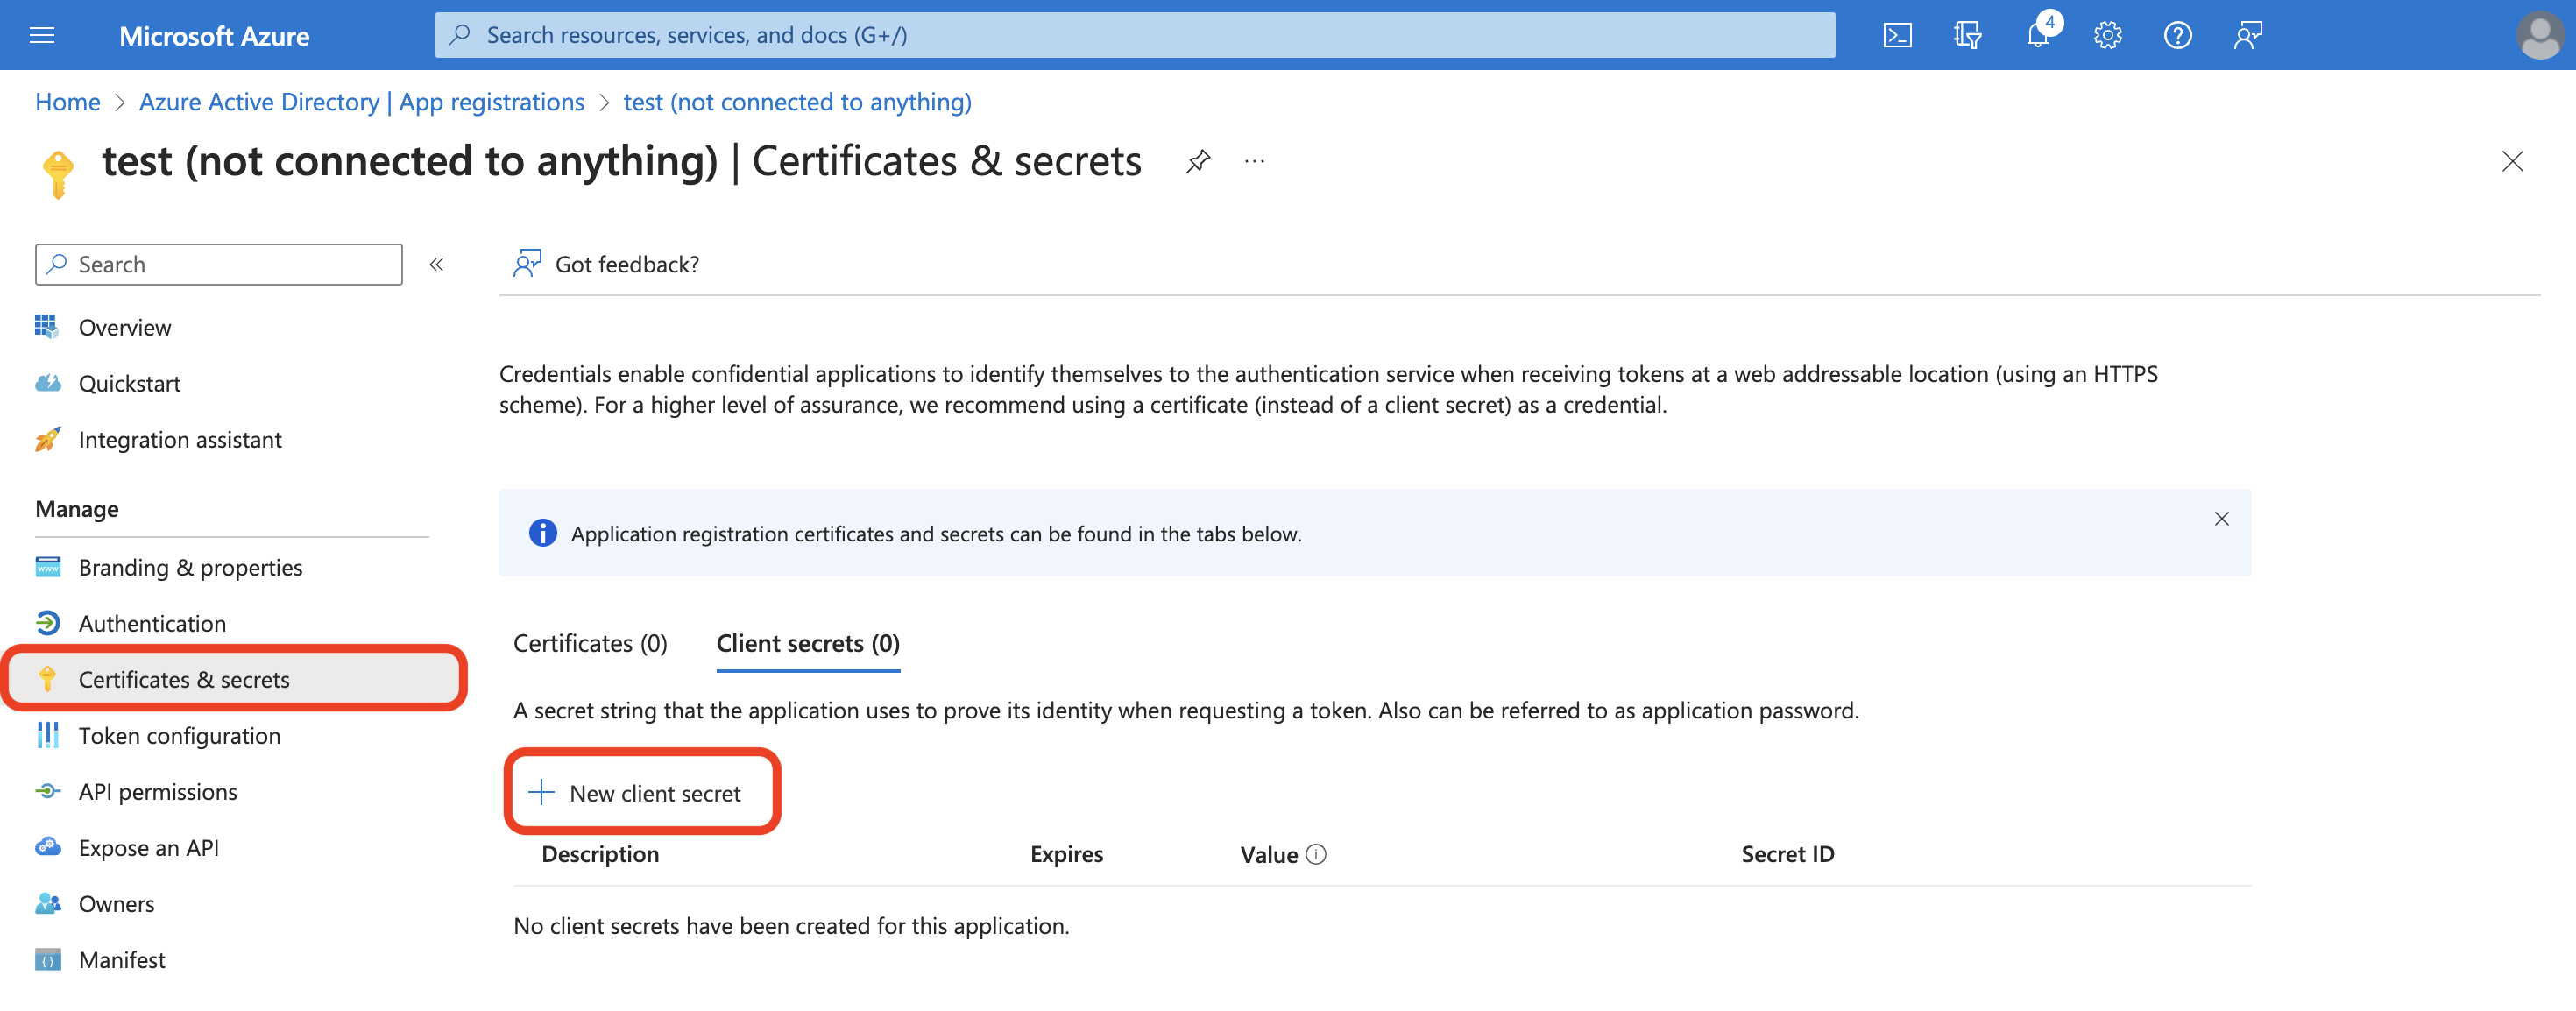 Certificates and secrets is selected in the left hand menu. The button New client secret is located under the tab Client secrets.